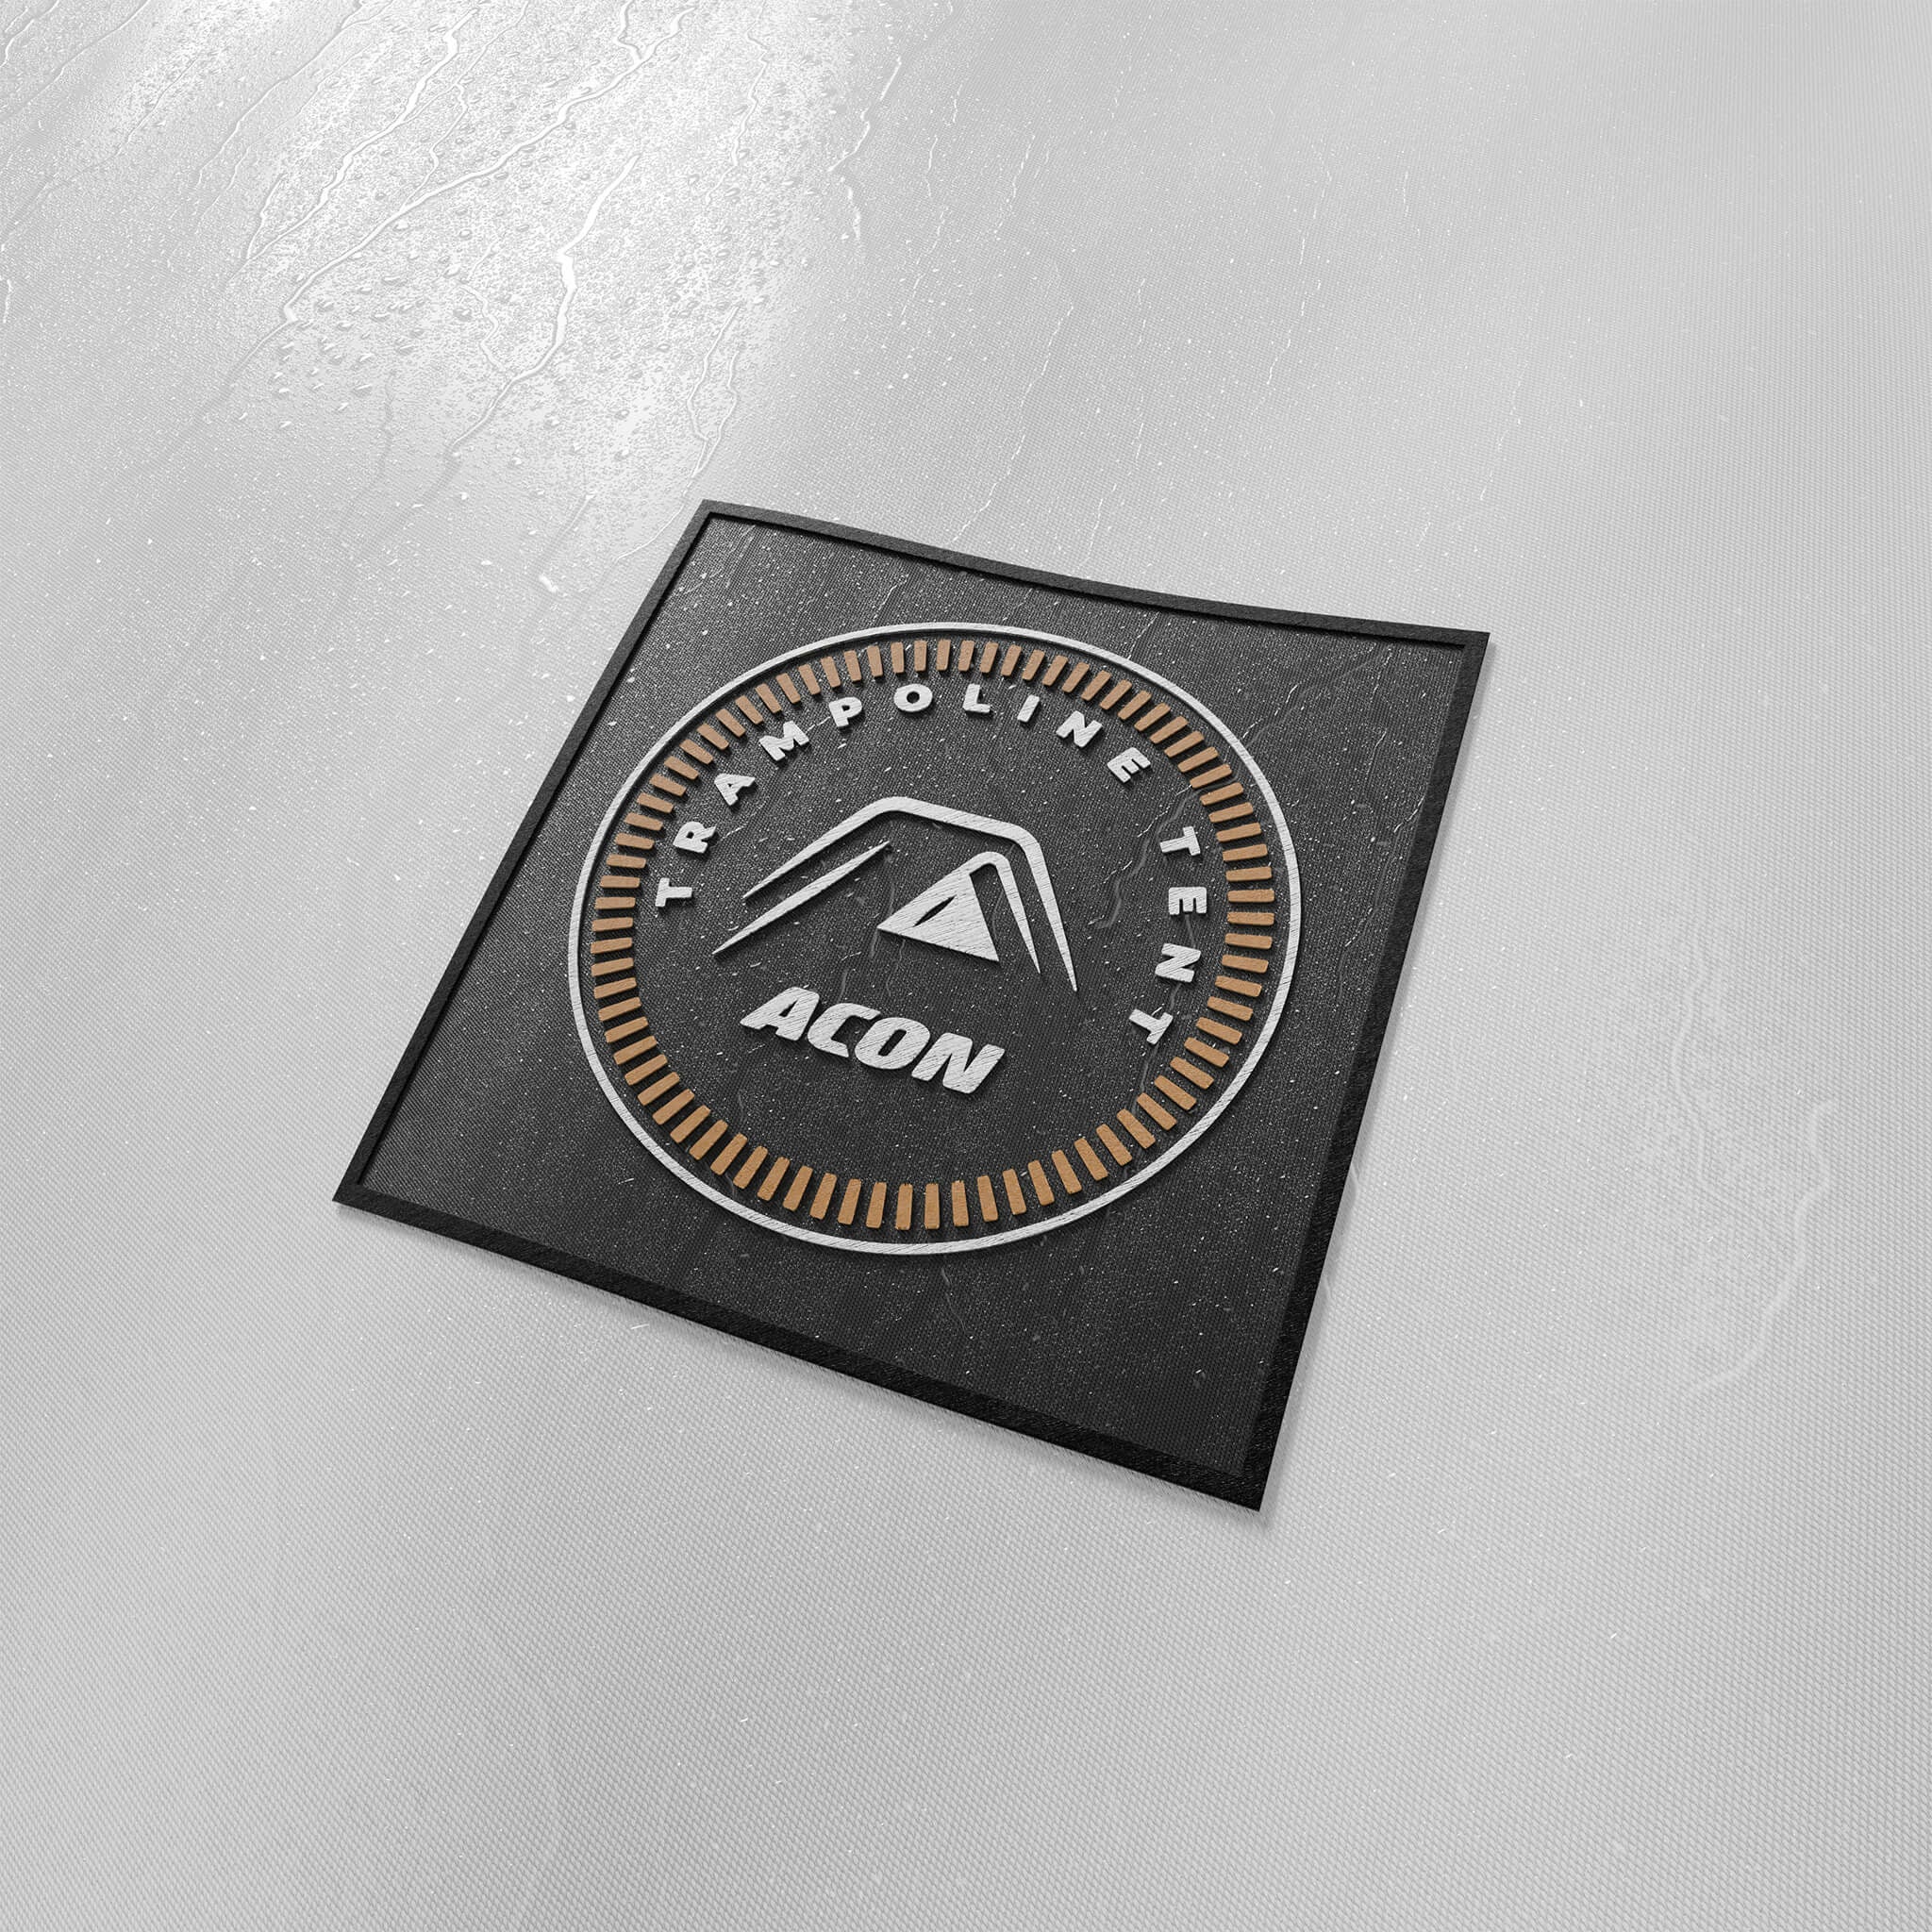 Close up image of the stitched waterproof badge onto the Acon Trampoline Tent with logo and tent illustration.